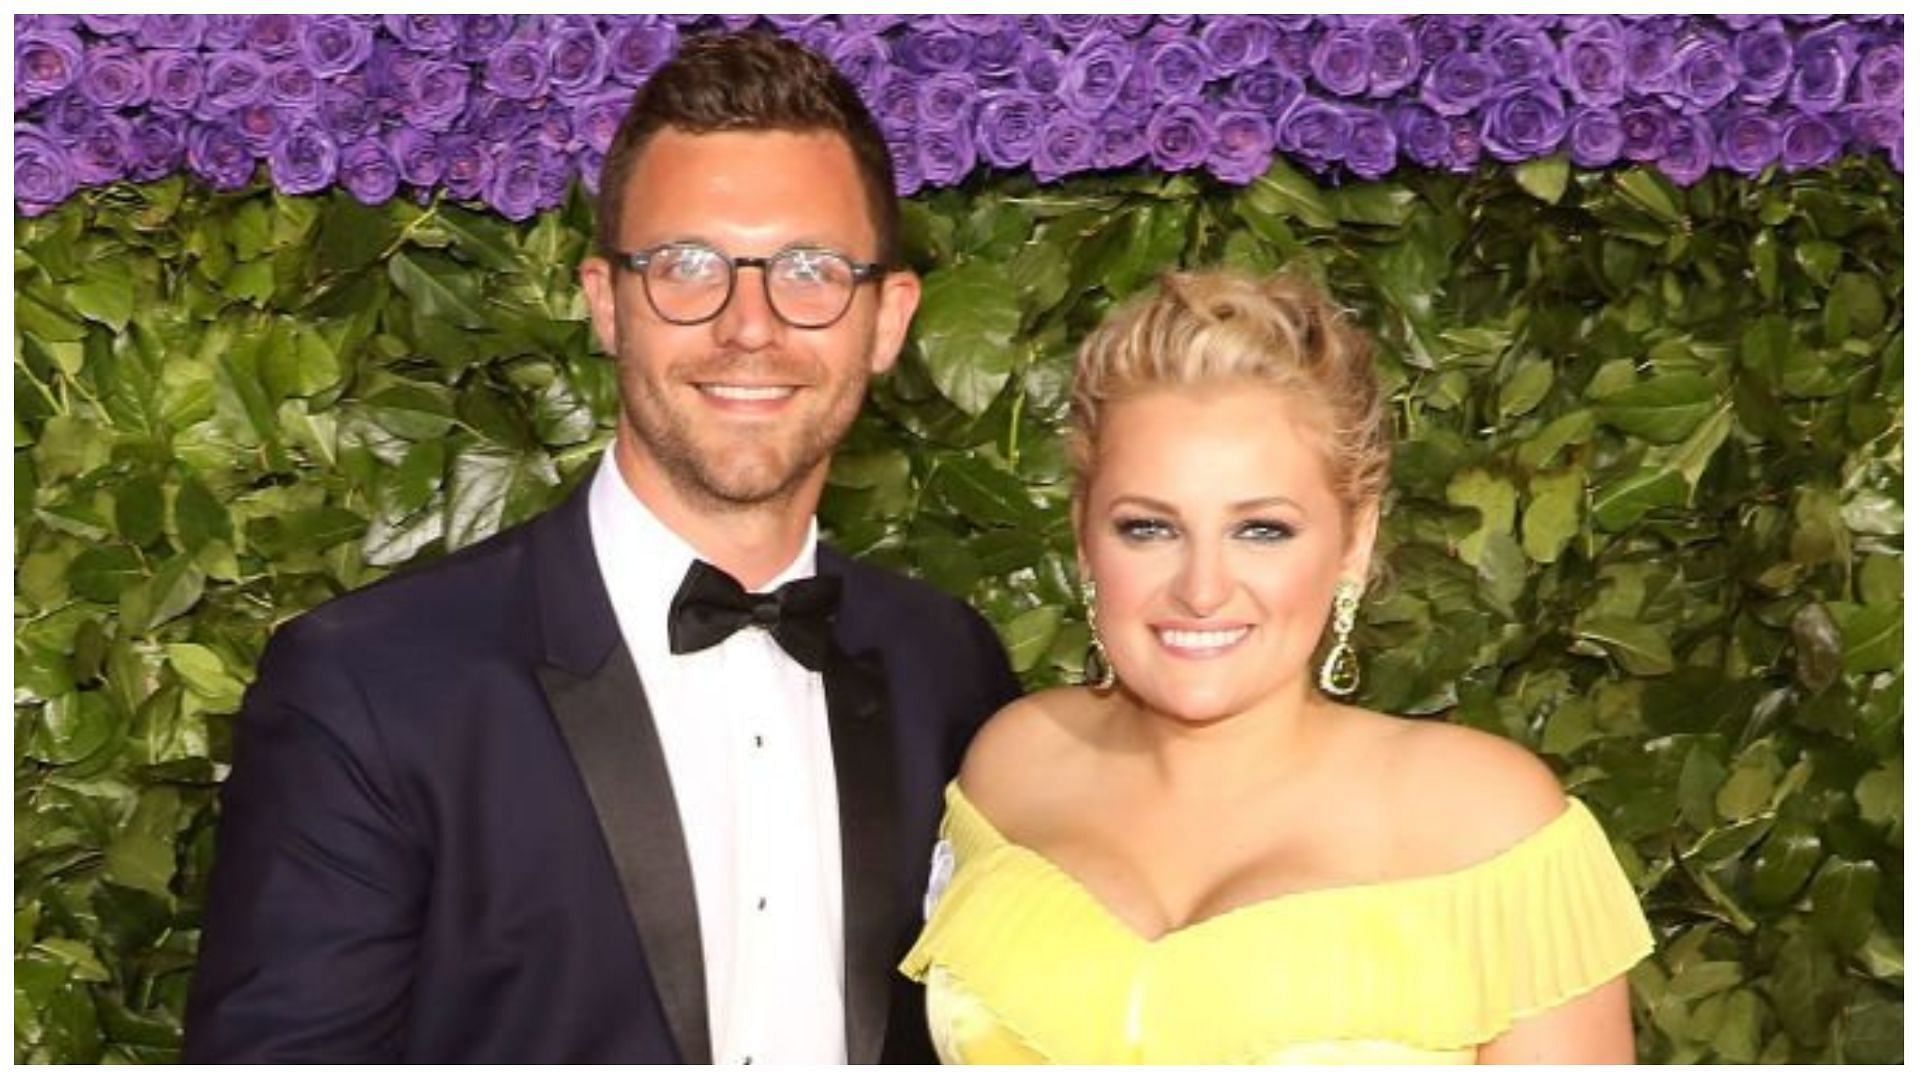 David Perlow and Ali Stroker would soon welcome their first child (Image via Taylor Hill/Getty Images)